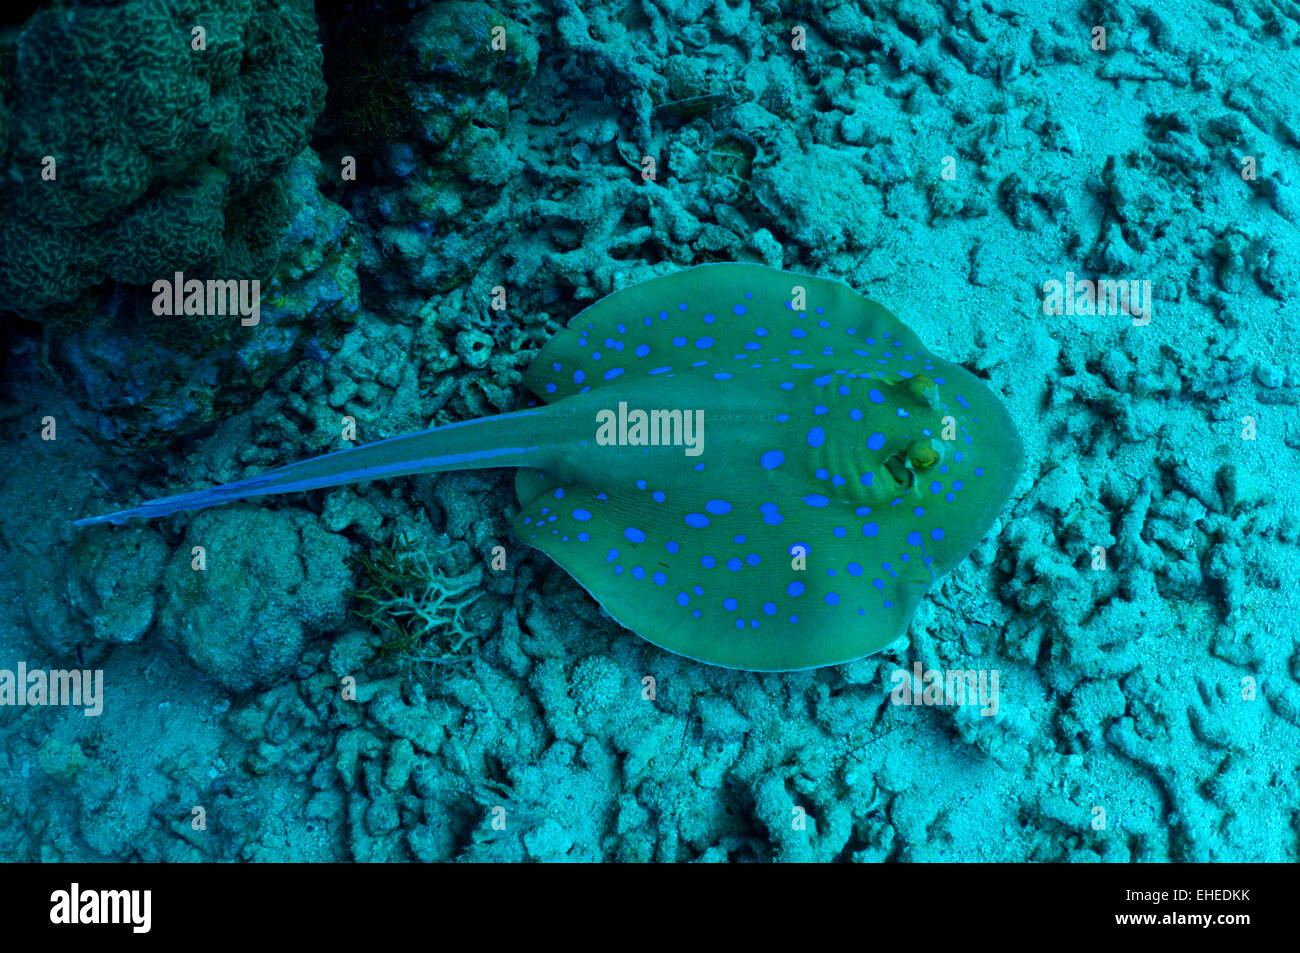 Coral reef. Blue spotted stingray Stock Photo